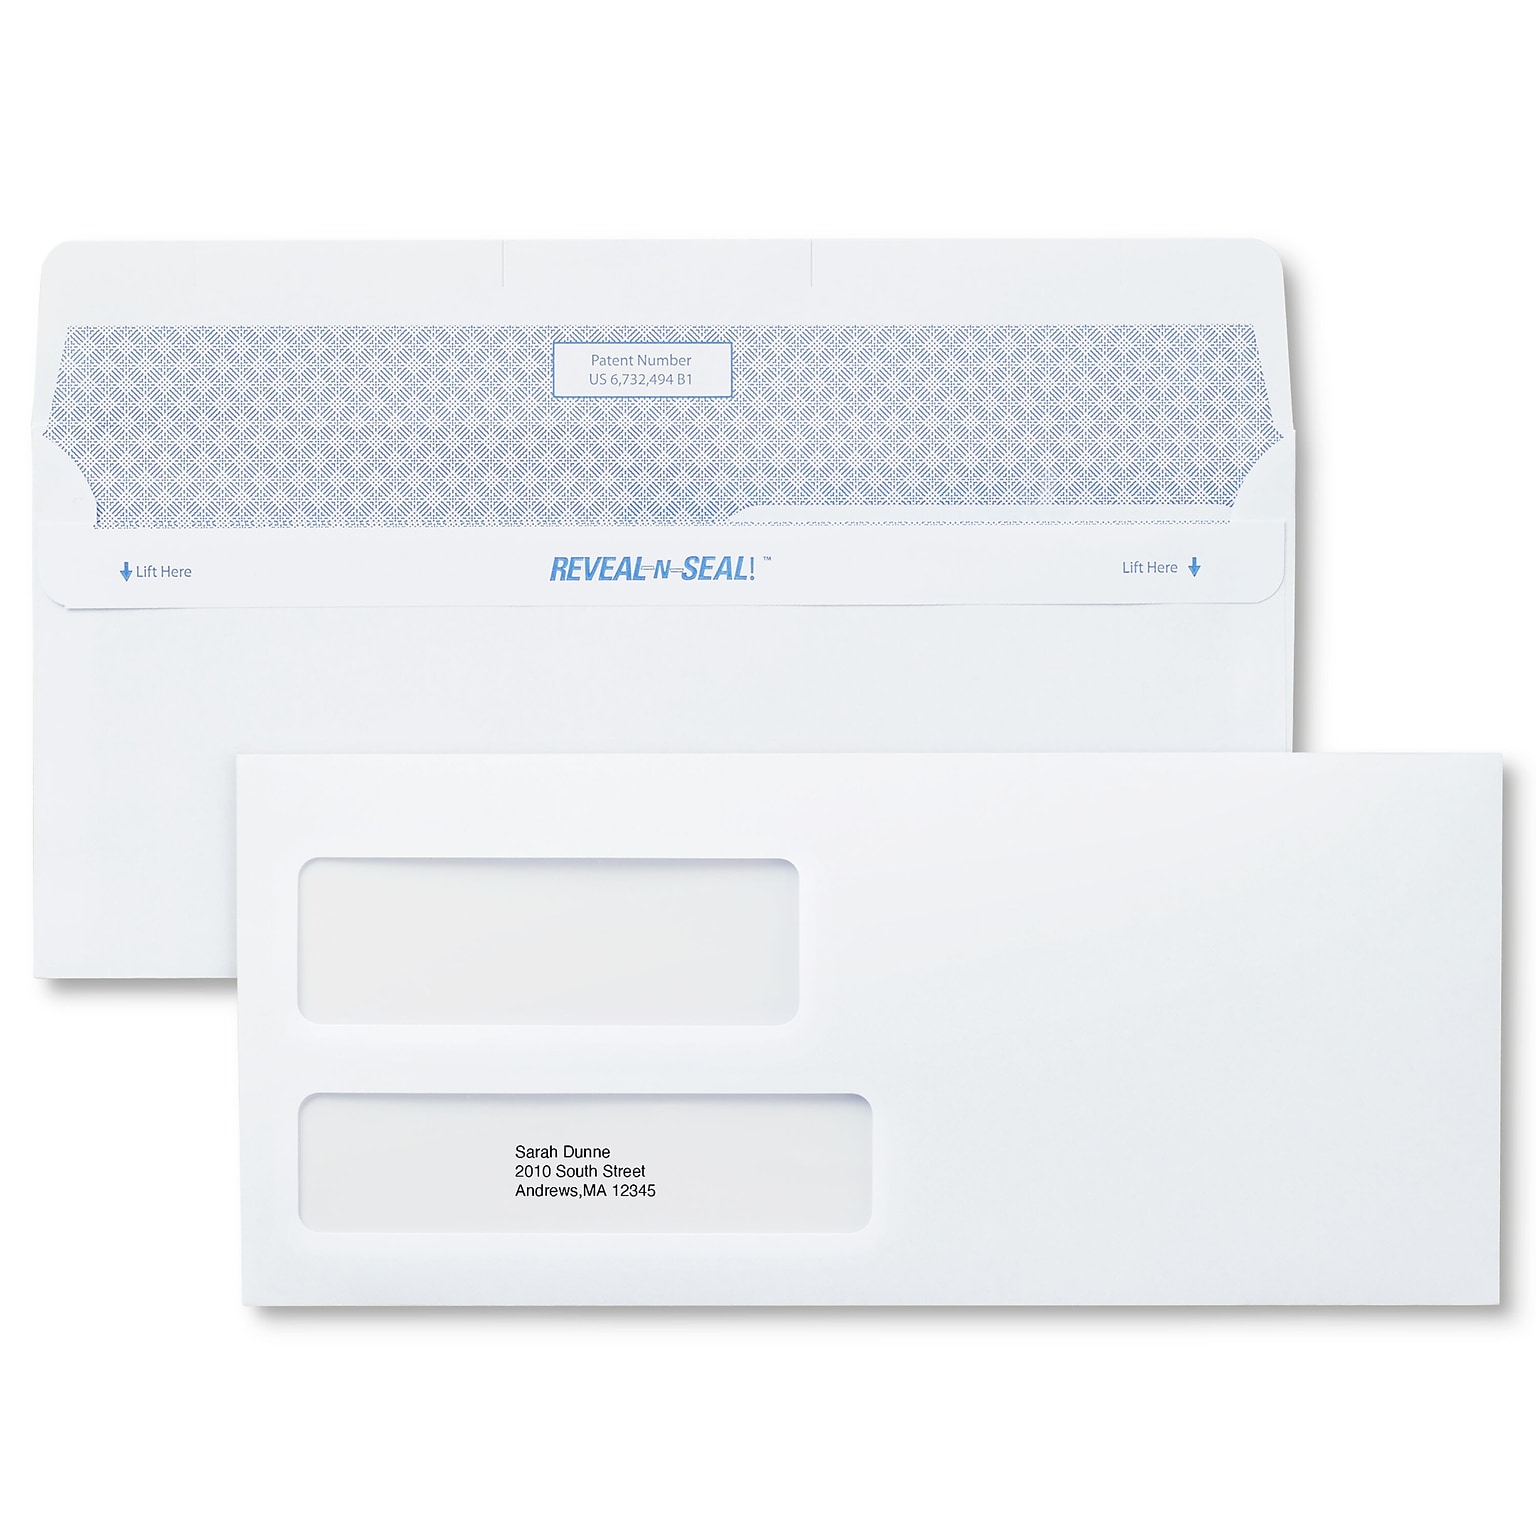 Staples Reveal-N-Seal Security Tinted #9 Business Envelopes, 3 7/8 x 8 7/8, White, 500/Box (SPL1775861)